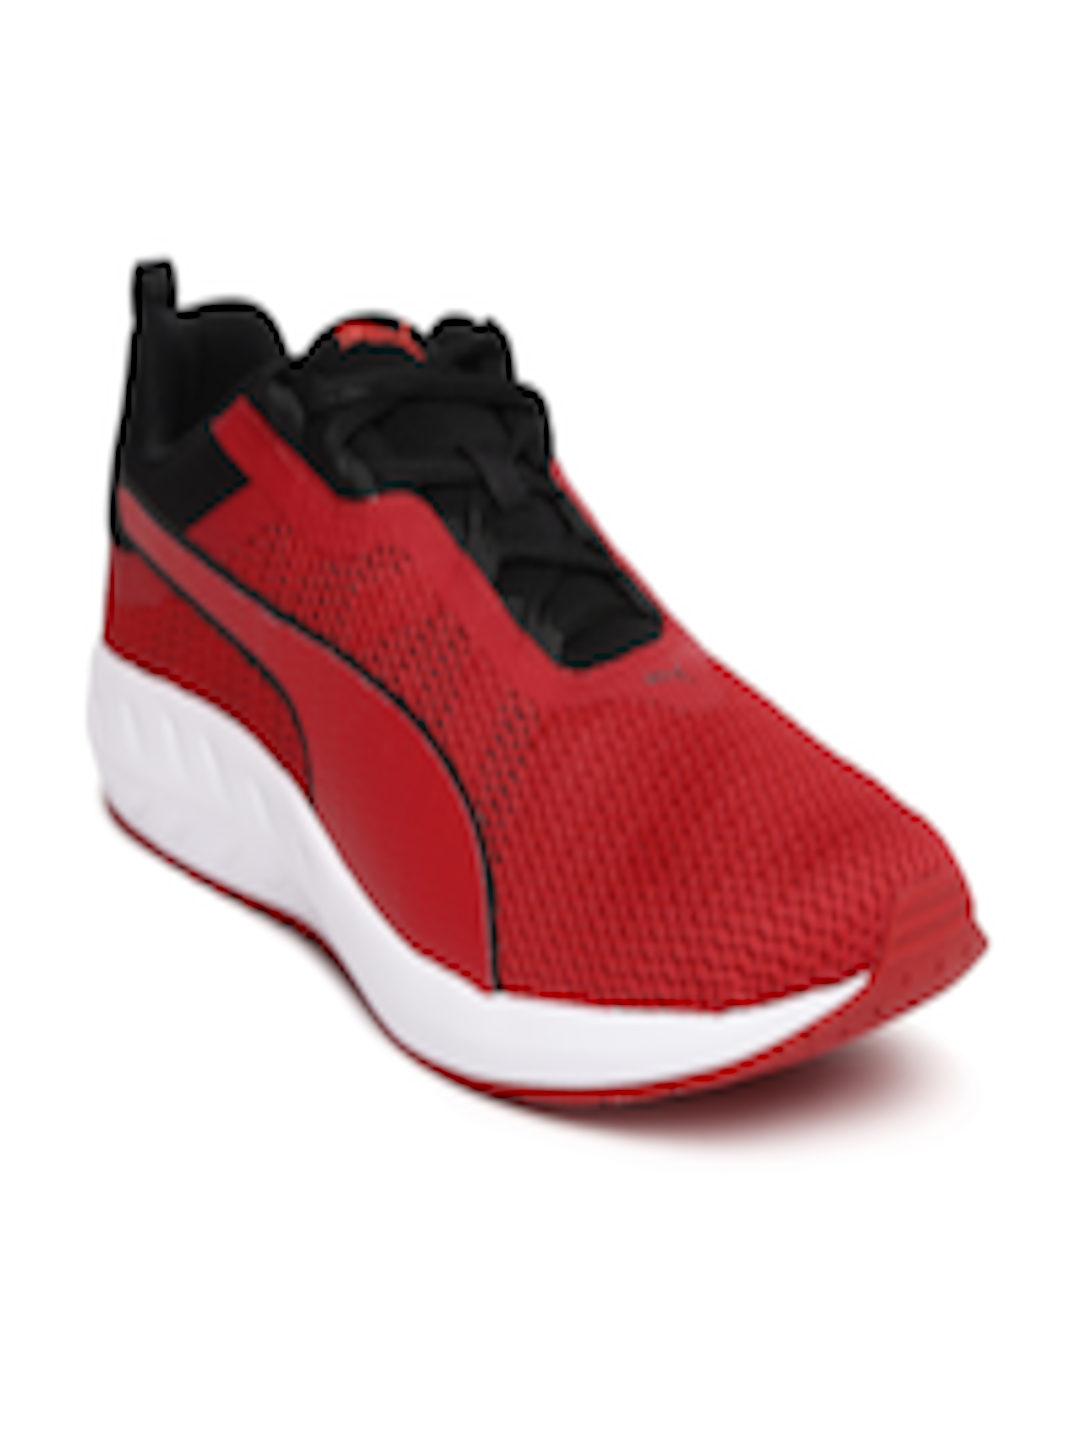 Buy Puma Men Red Running Shoes - Sports Shoes for Men 2254329 | Myntra